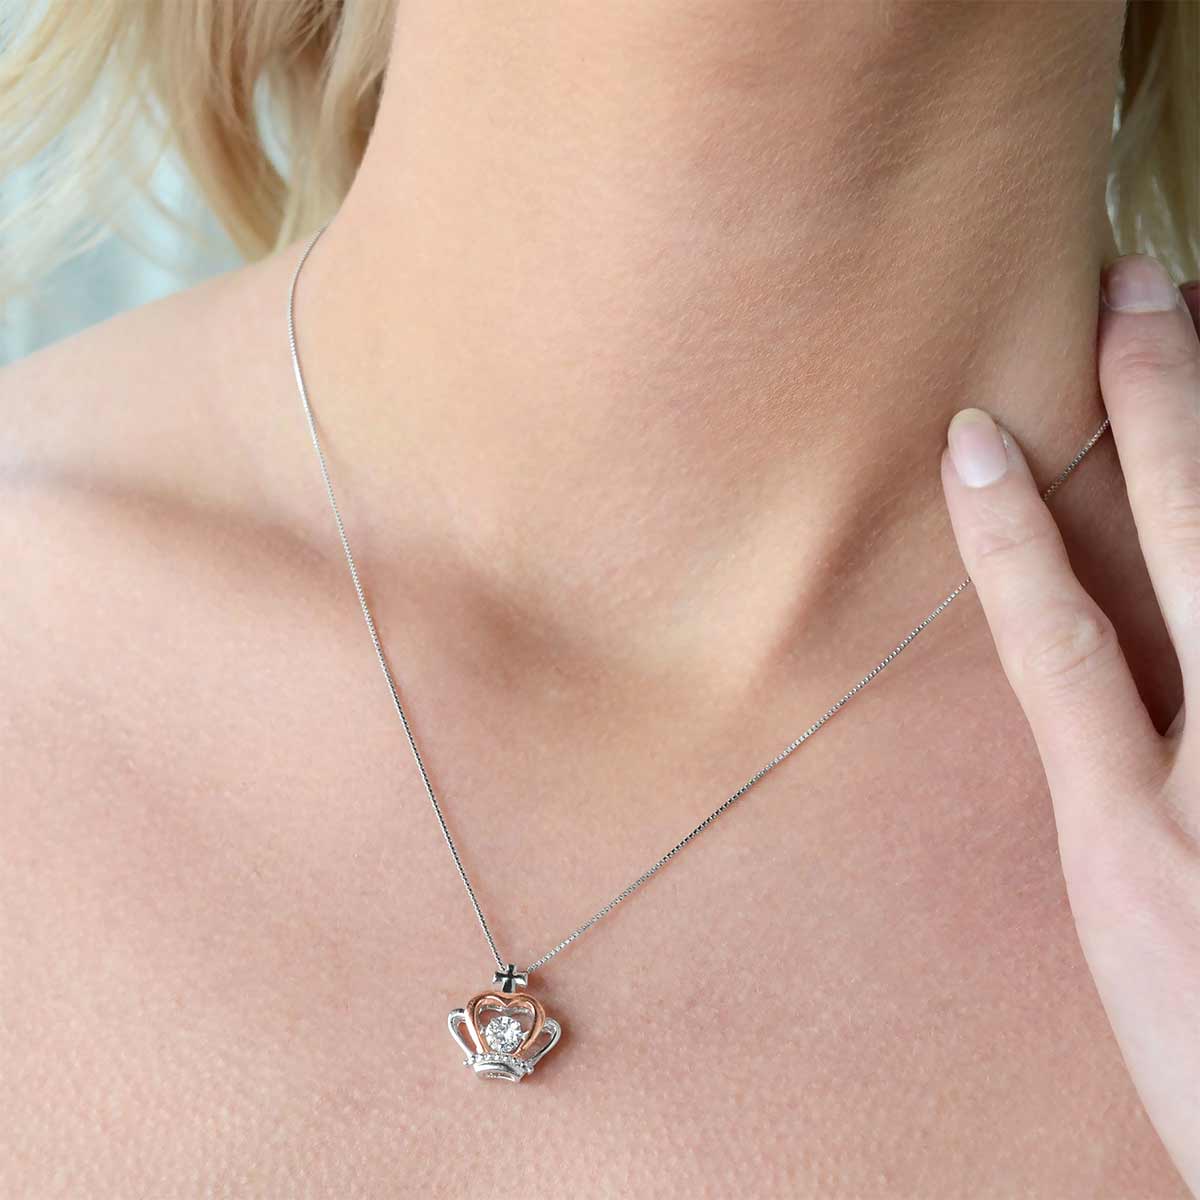 To My Badass Mom, Queen of Everything - Luxe Crown Pendant Necklace Gift Set